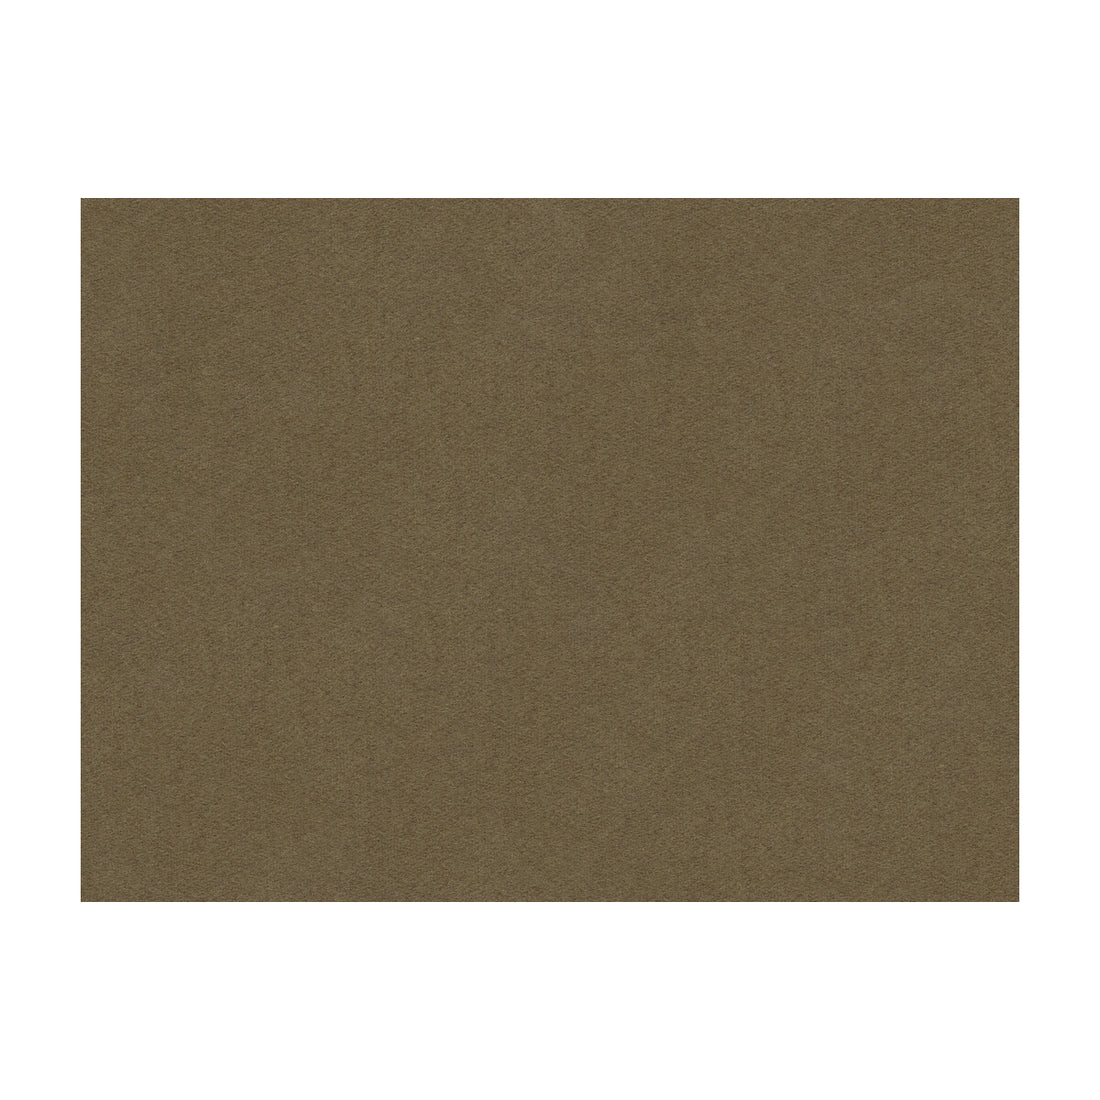 Chevalier Wool fabric in taupe color - pattern 8013149.106.0 - by Brunschwig &amp; Fils